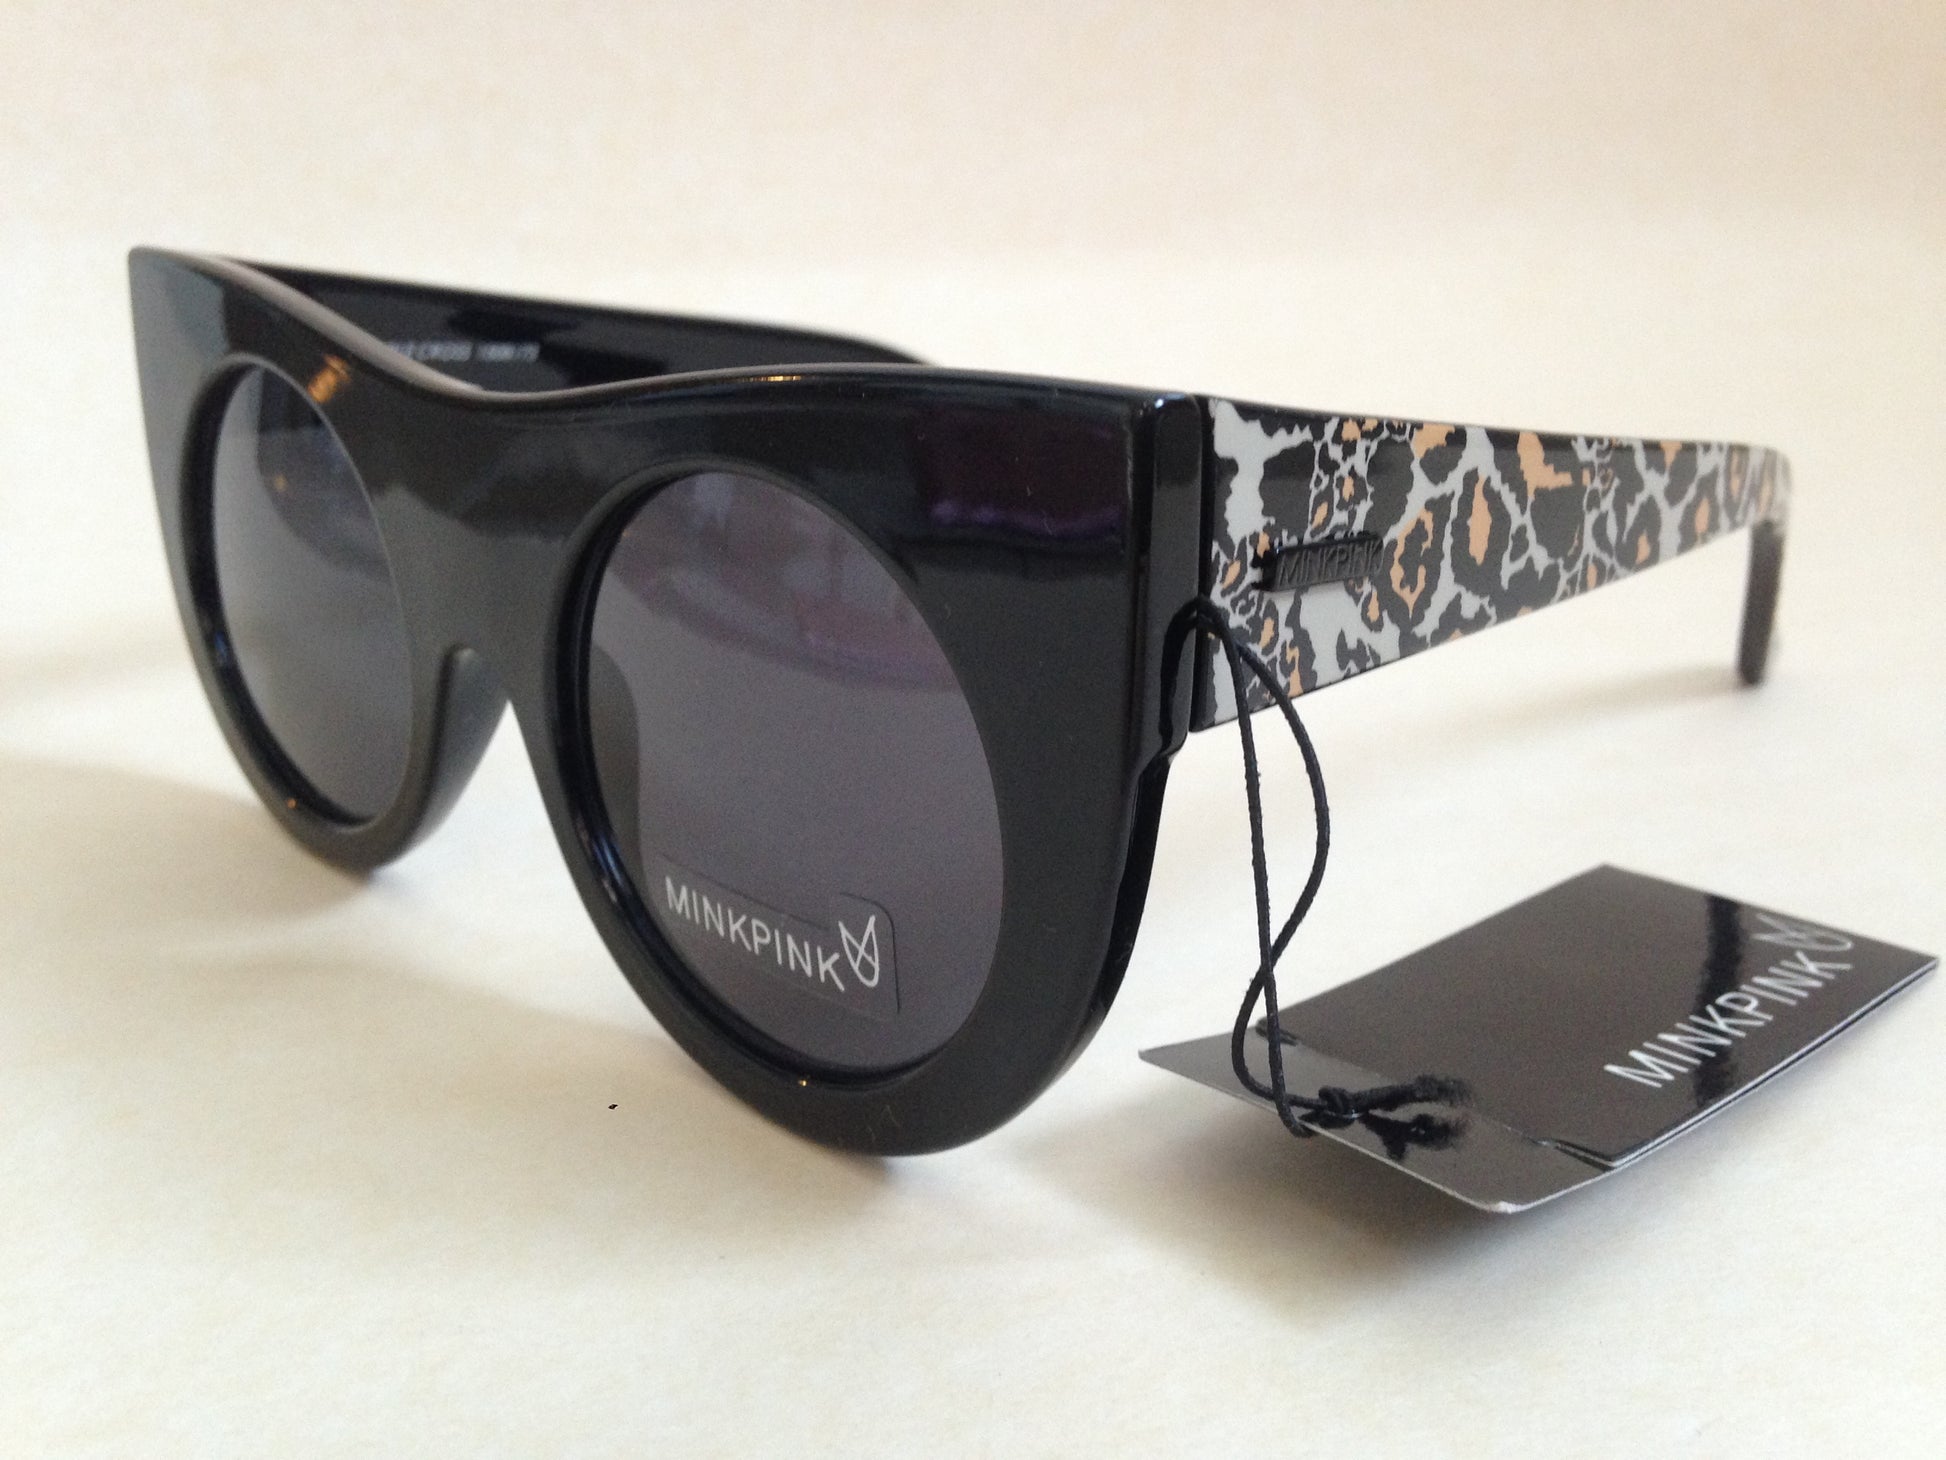 Minkpink Sunglasses New Authentic Double Cross Round Cat Eye Black With Leopard - Sunglasses